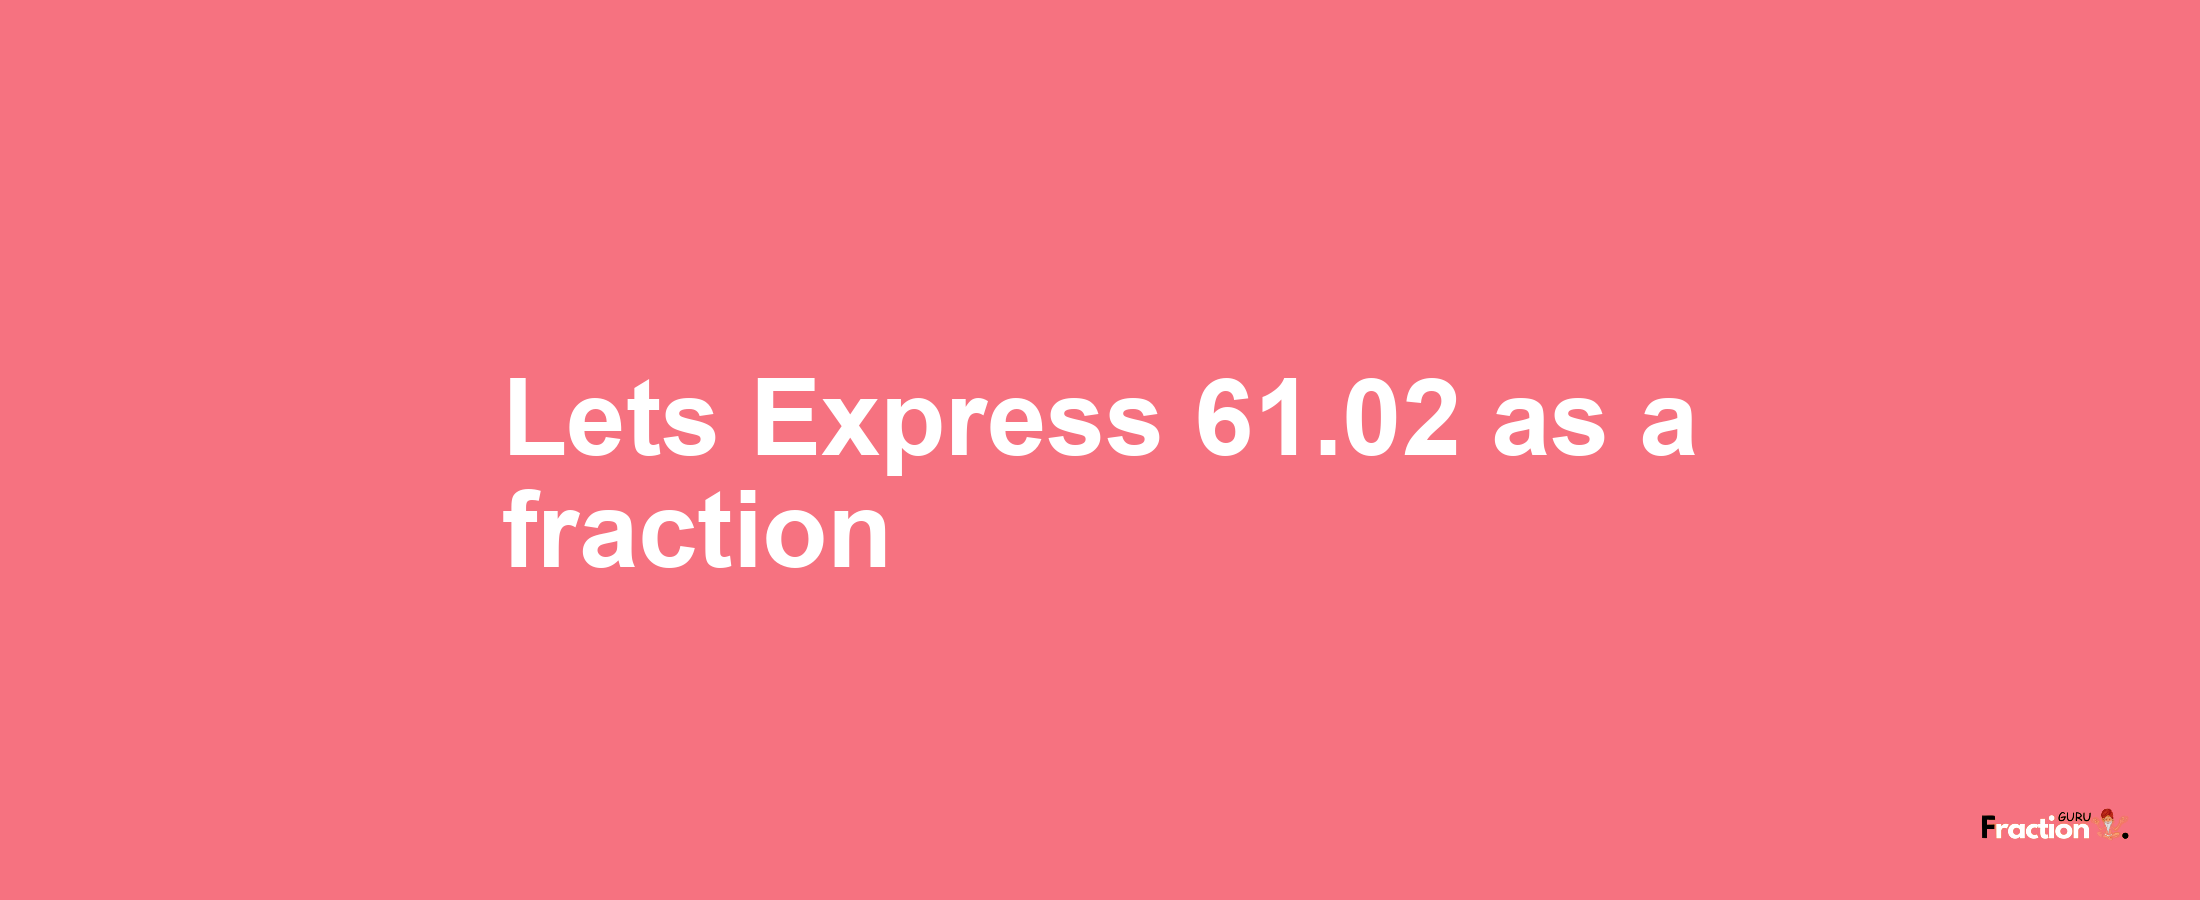 Lets Express 61.02 as afraction